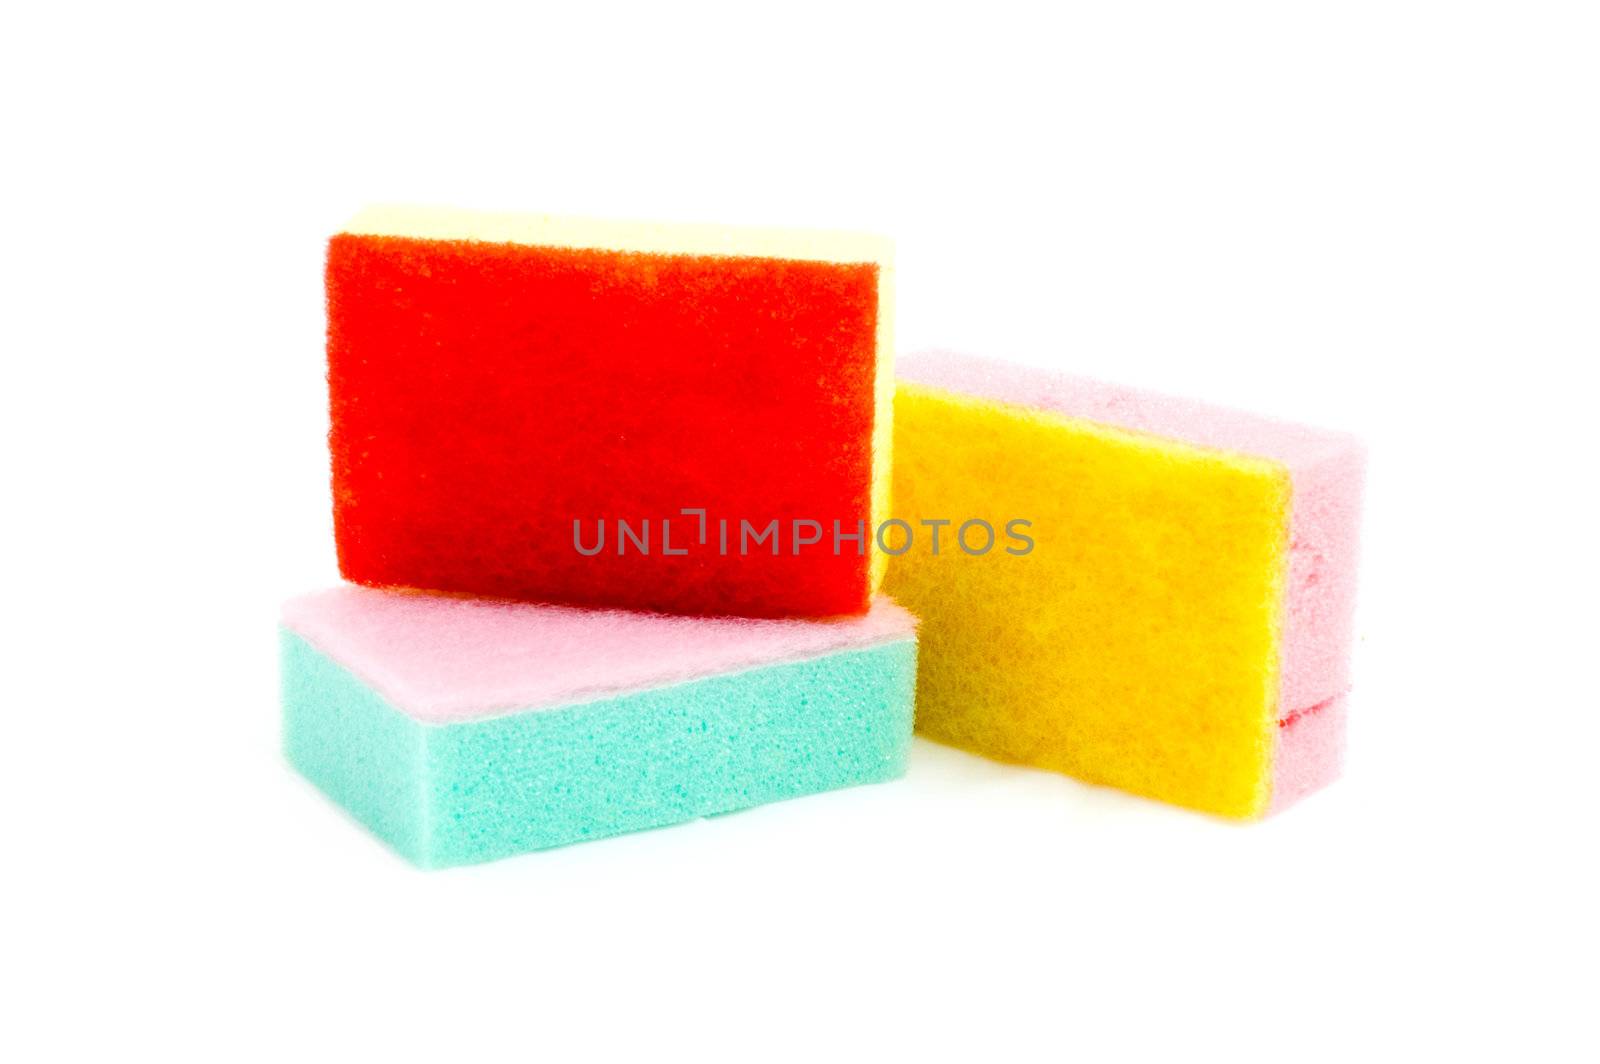 stack of colorful cleaning sponges isolated on a white background 

